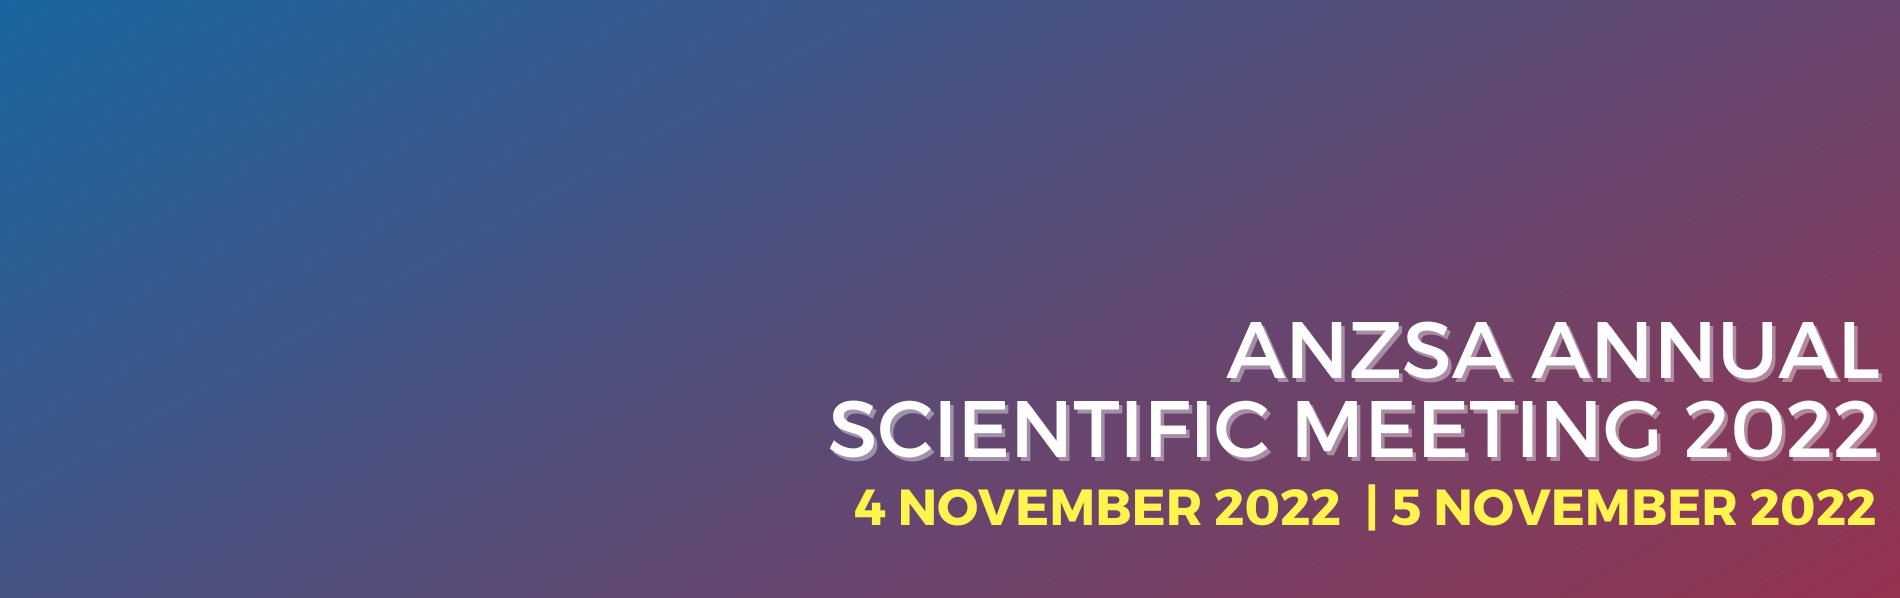 Register for the 2022 ANZSA Annual Scientific Meeting